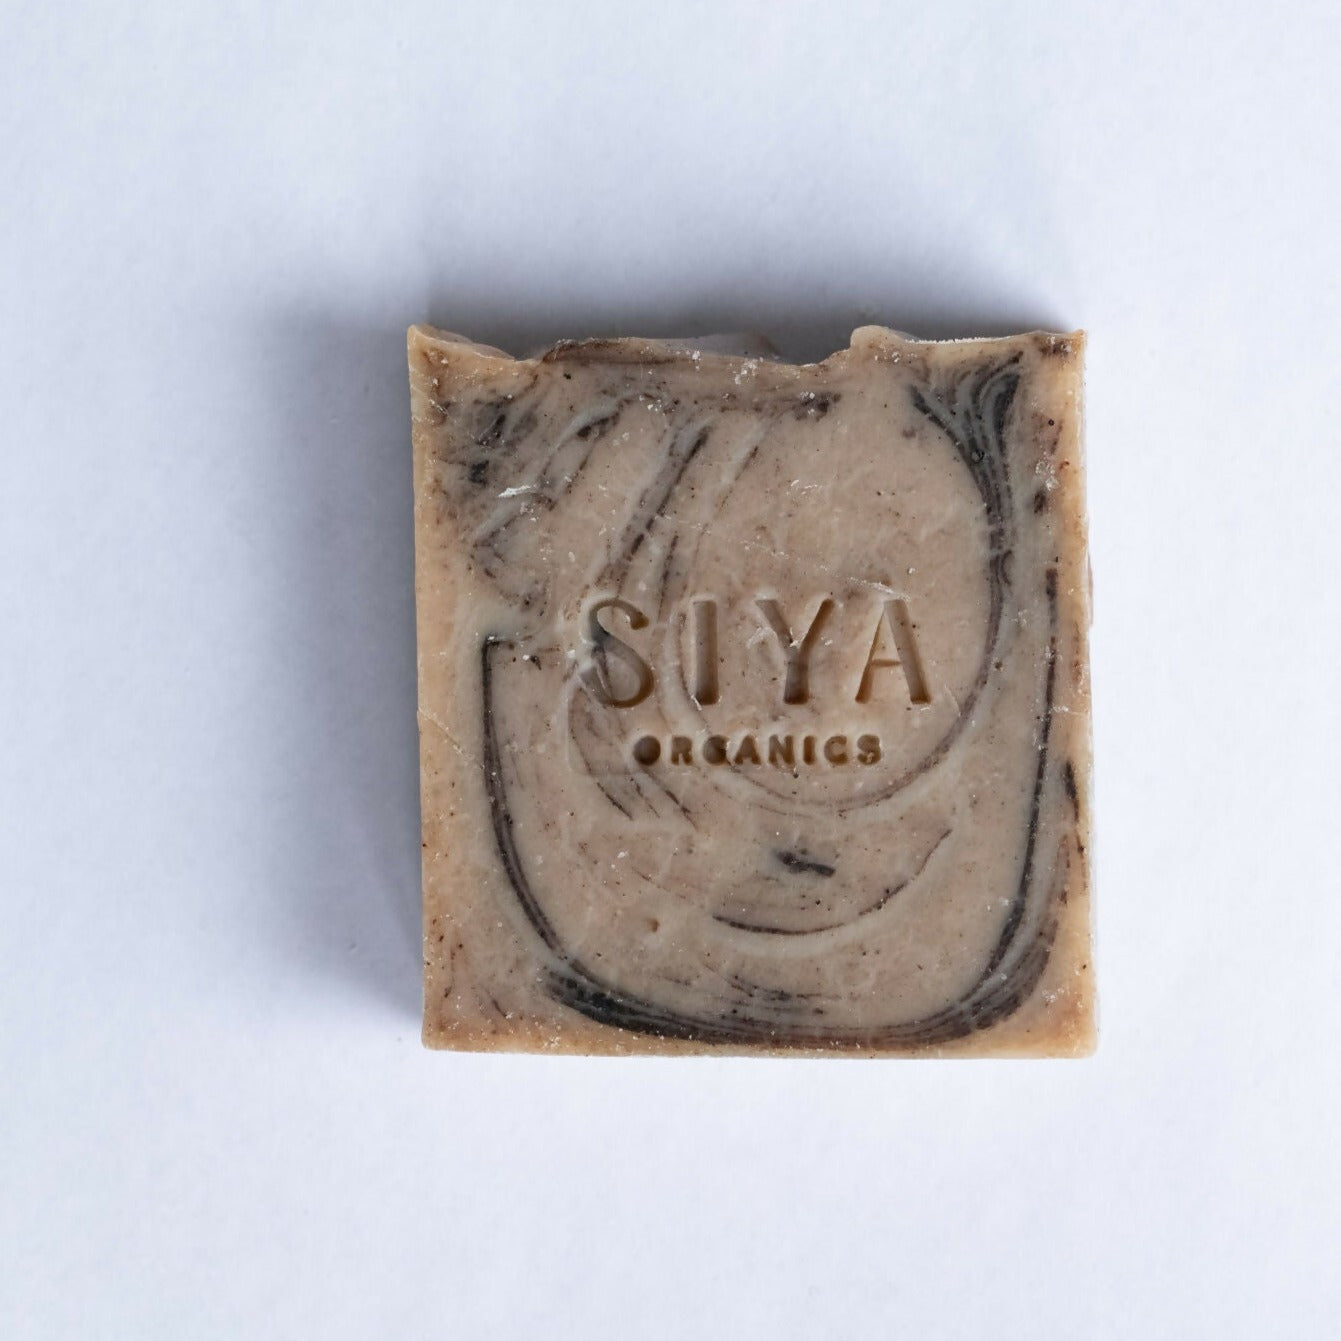 Natural Cacaobutter soap